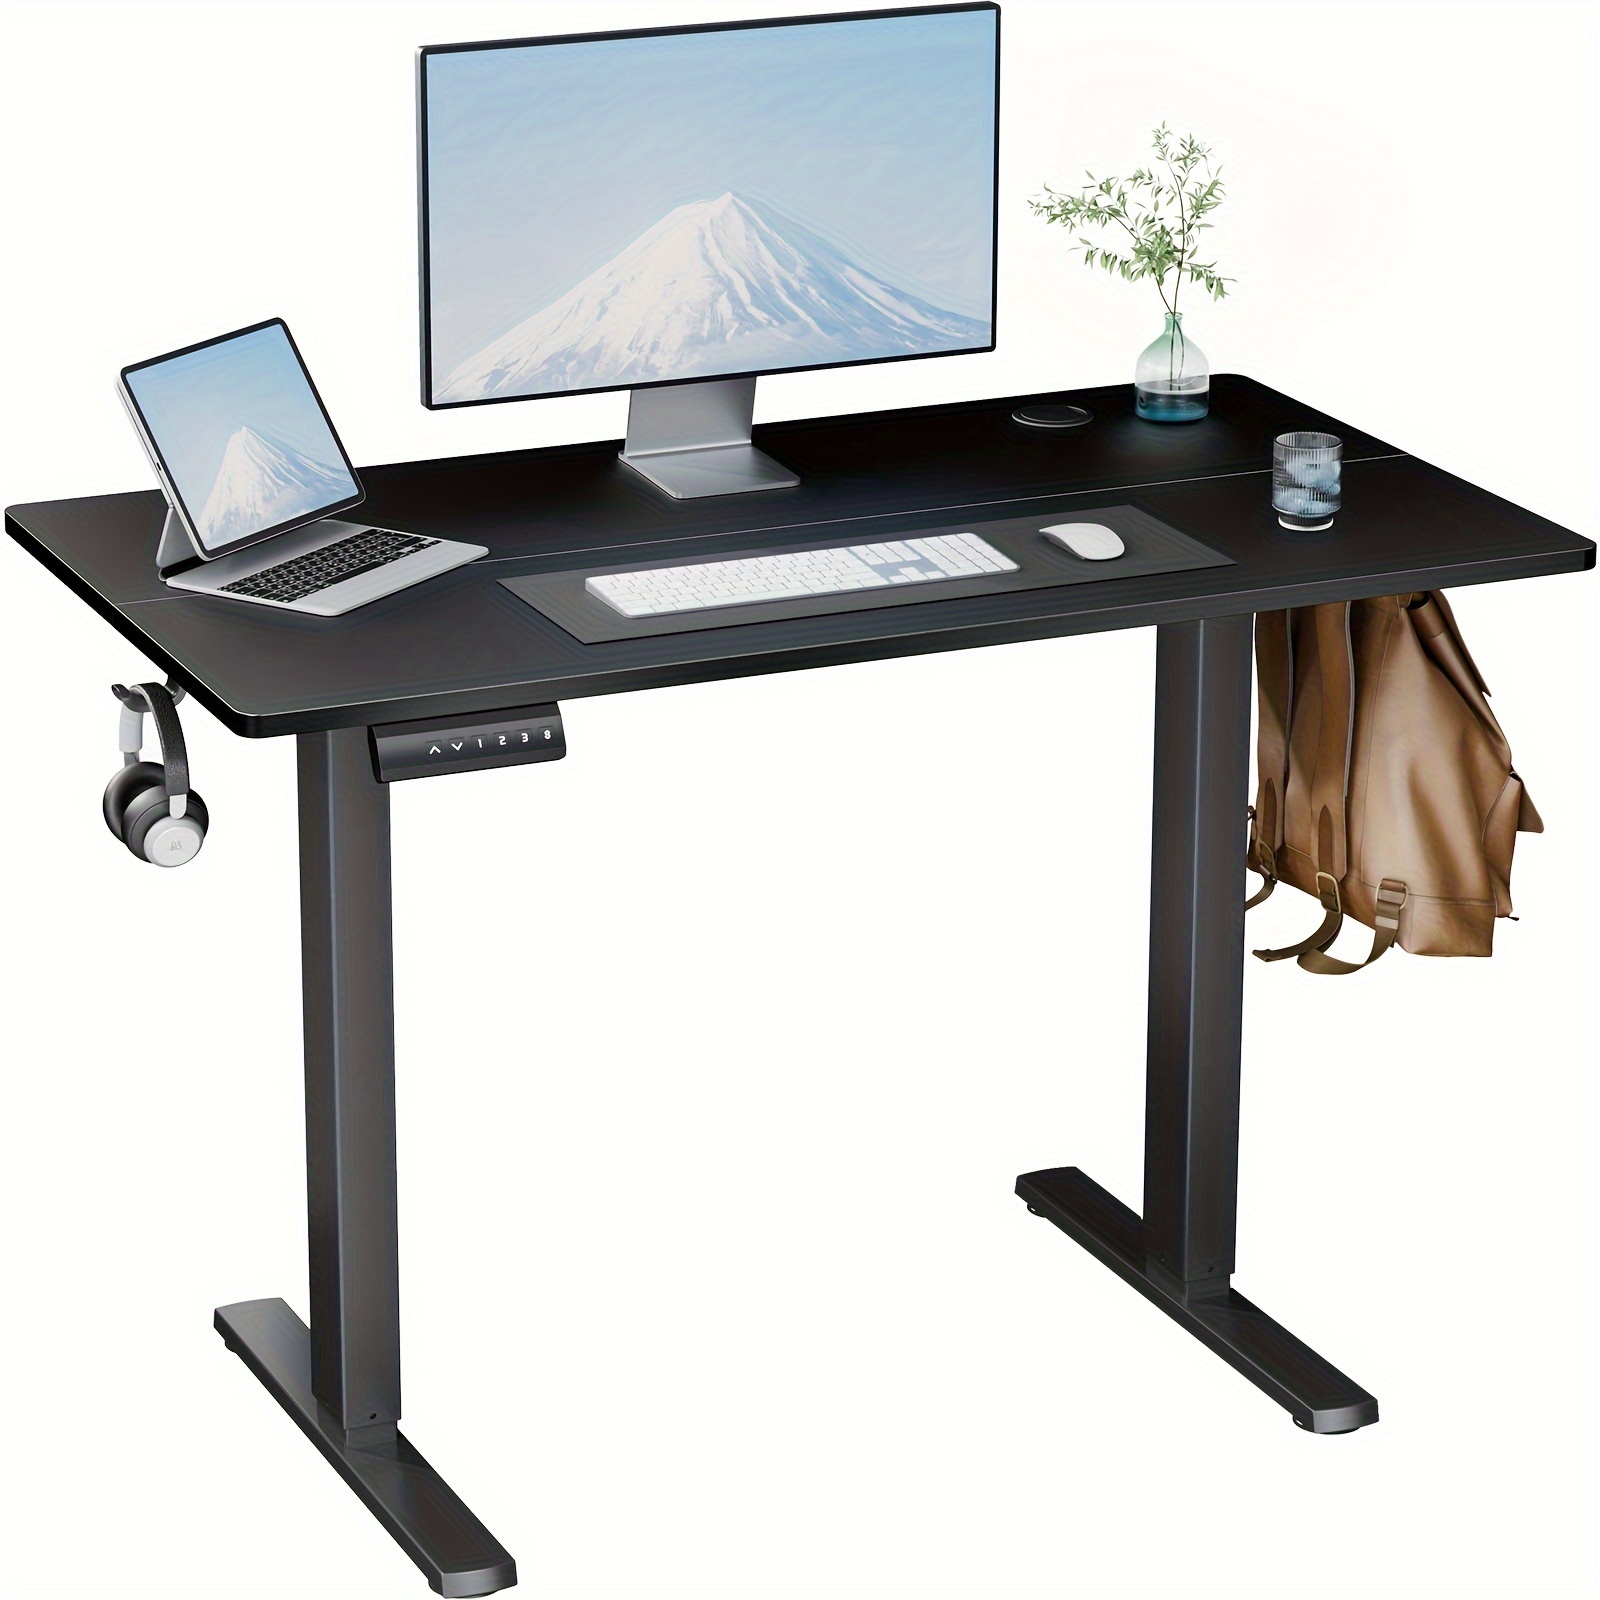 

Electric Standing Desk Height Adjustable 40x24 Inch Stand Up Sit Stand Computer Workstation Ergonomic Work Table With Preset Controller Wood Top Metal Frame For Home Office